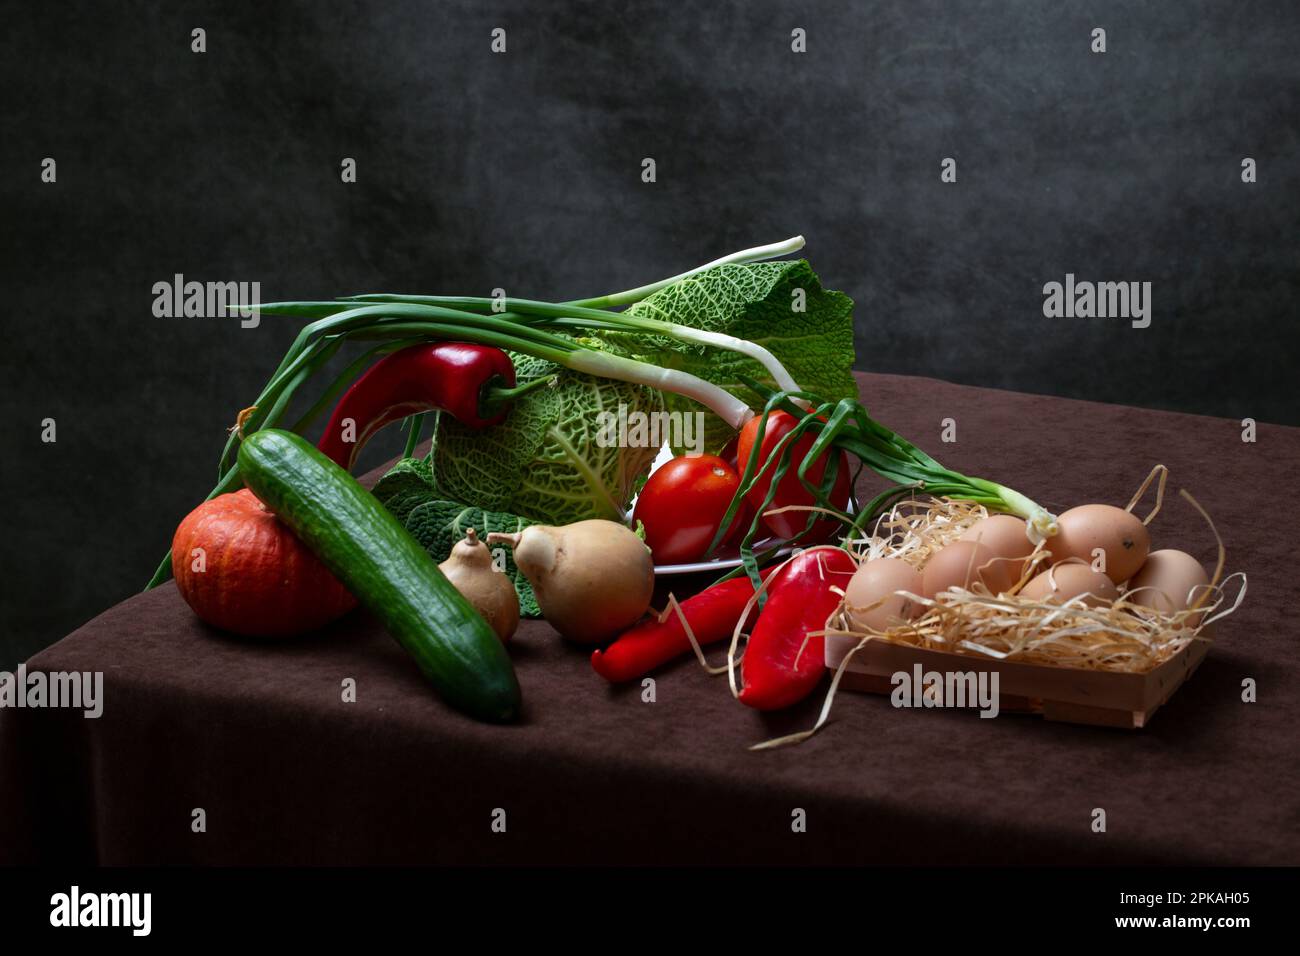 Still life with Savoy cabbage, tomatoes, cucumber, red pepper, pumpkin, onion and eggs Stock Photo